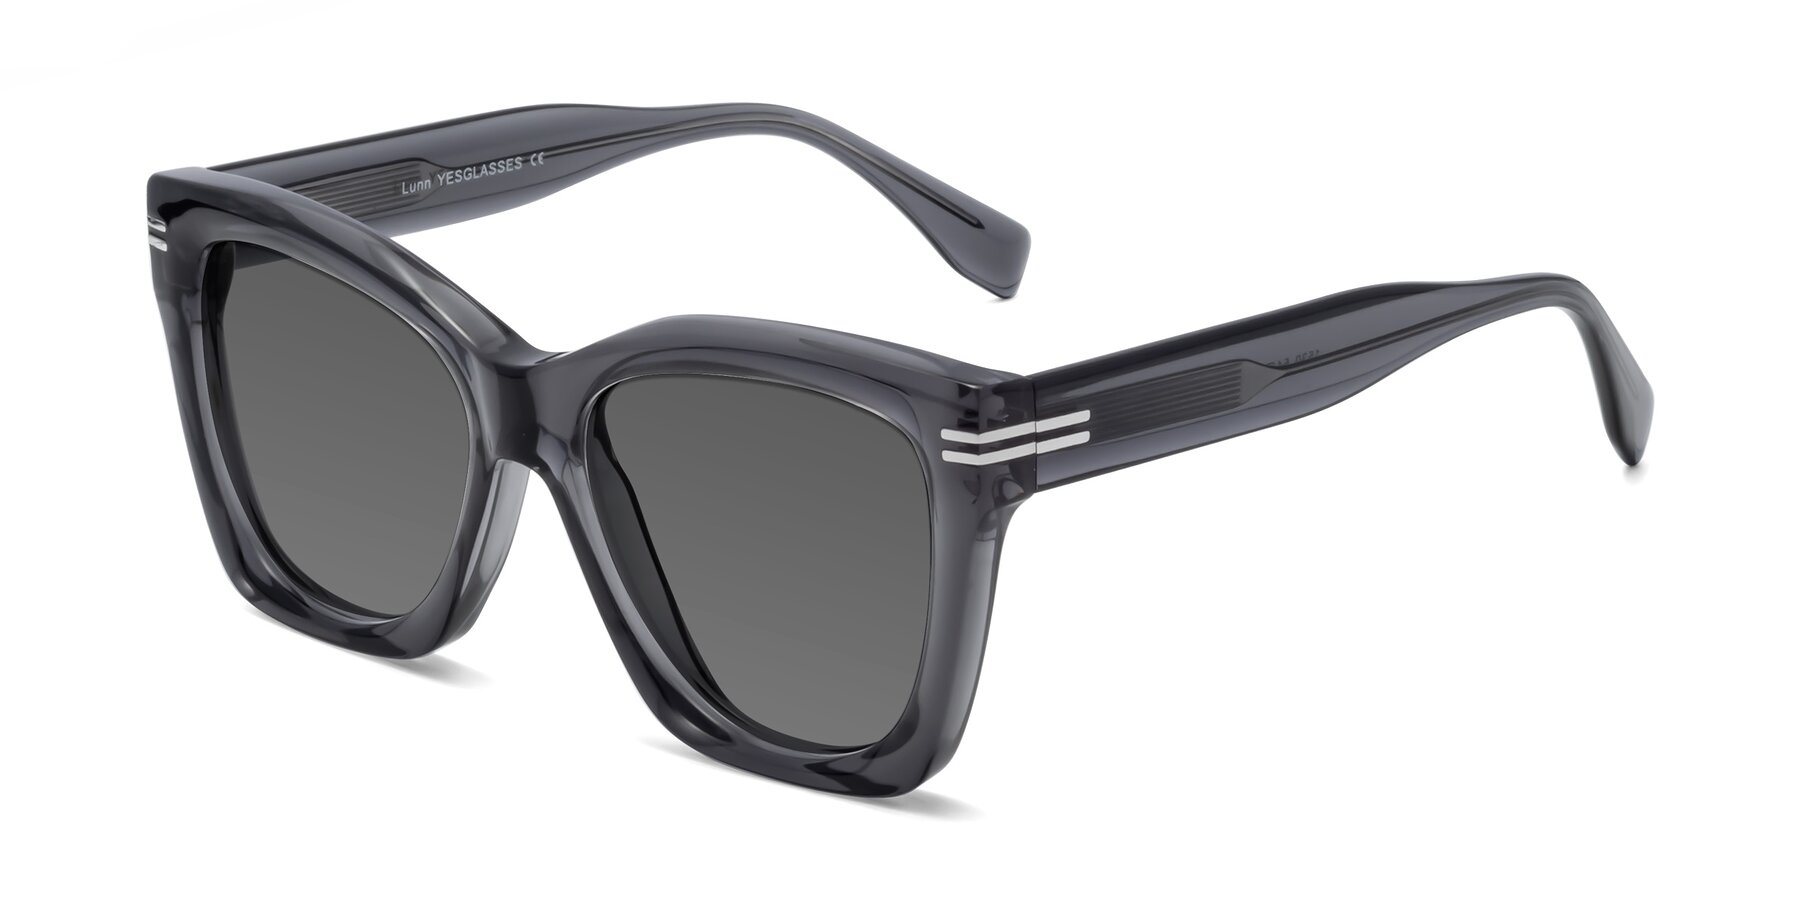 Angle of Lunn in Translucent Gray with Medium Gray Tinted Lenses